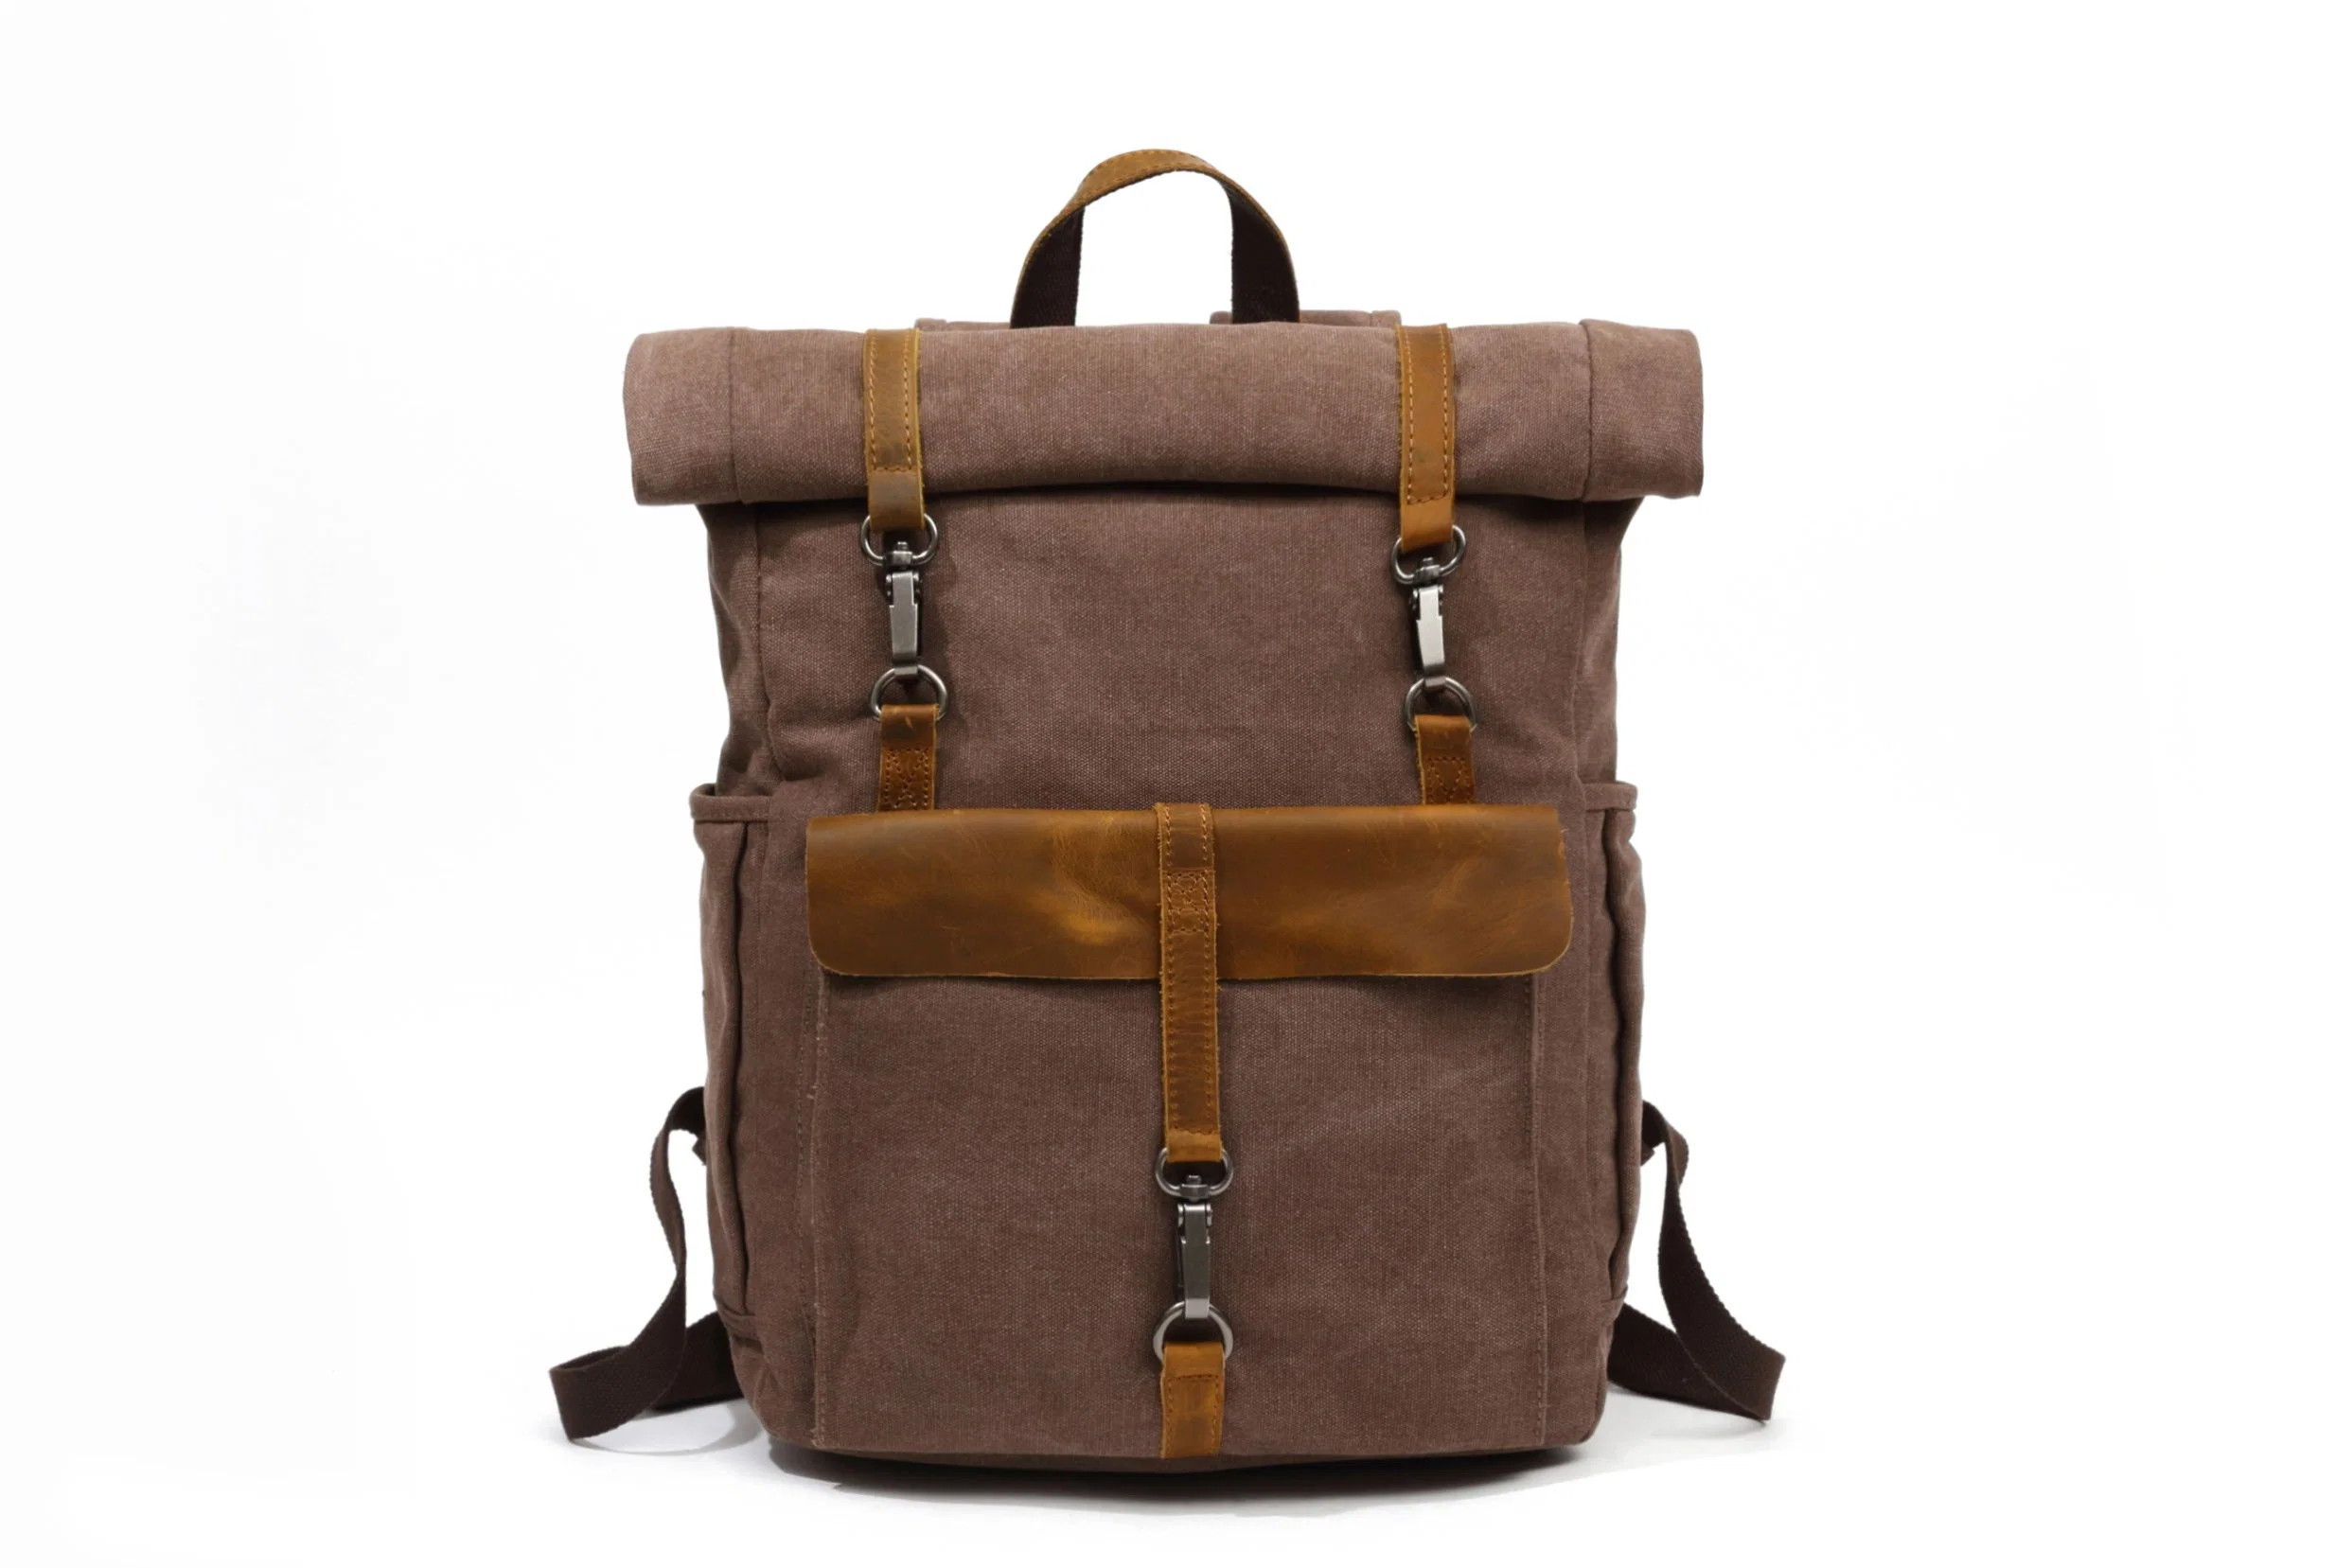 Waxed Genuine Leather Outdoor Sporting Vintage Canvas Backpack Bag (RSF-8828)